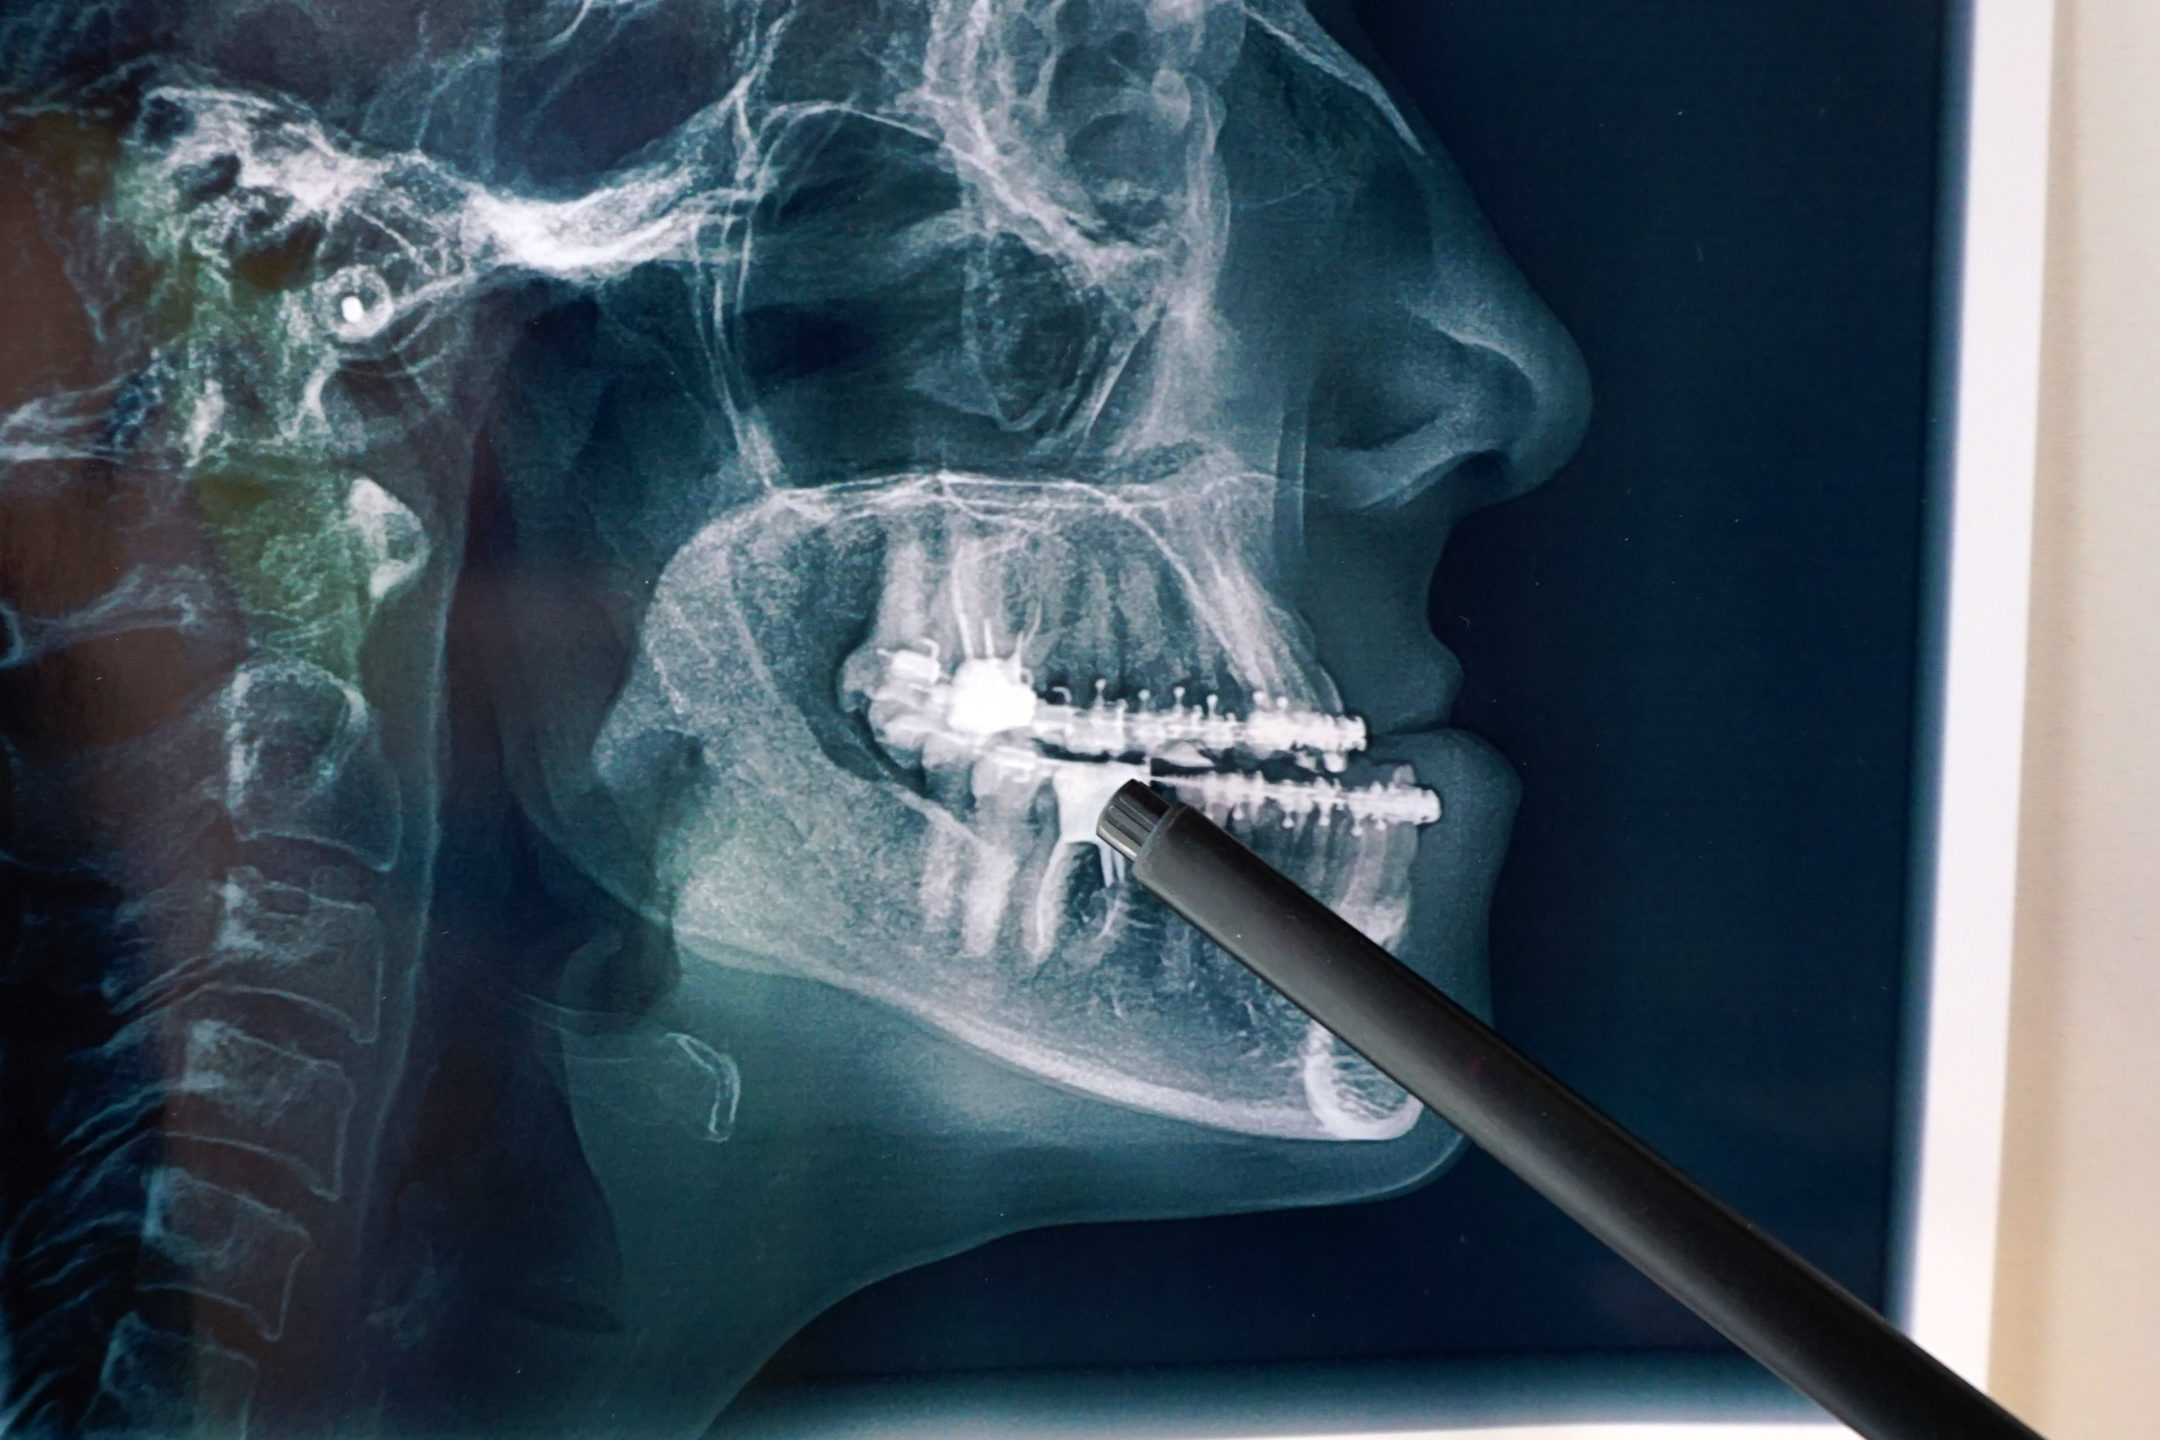 Digital image of a human jaw during a consultation for corrective jaw surgery.